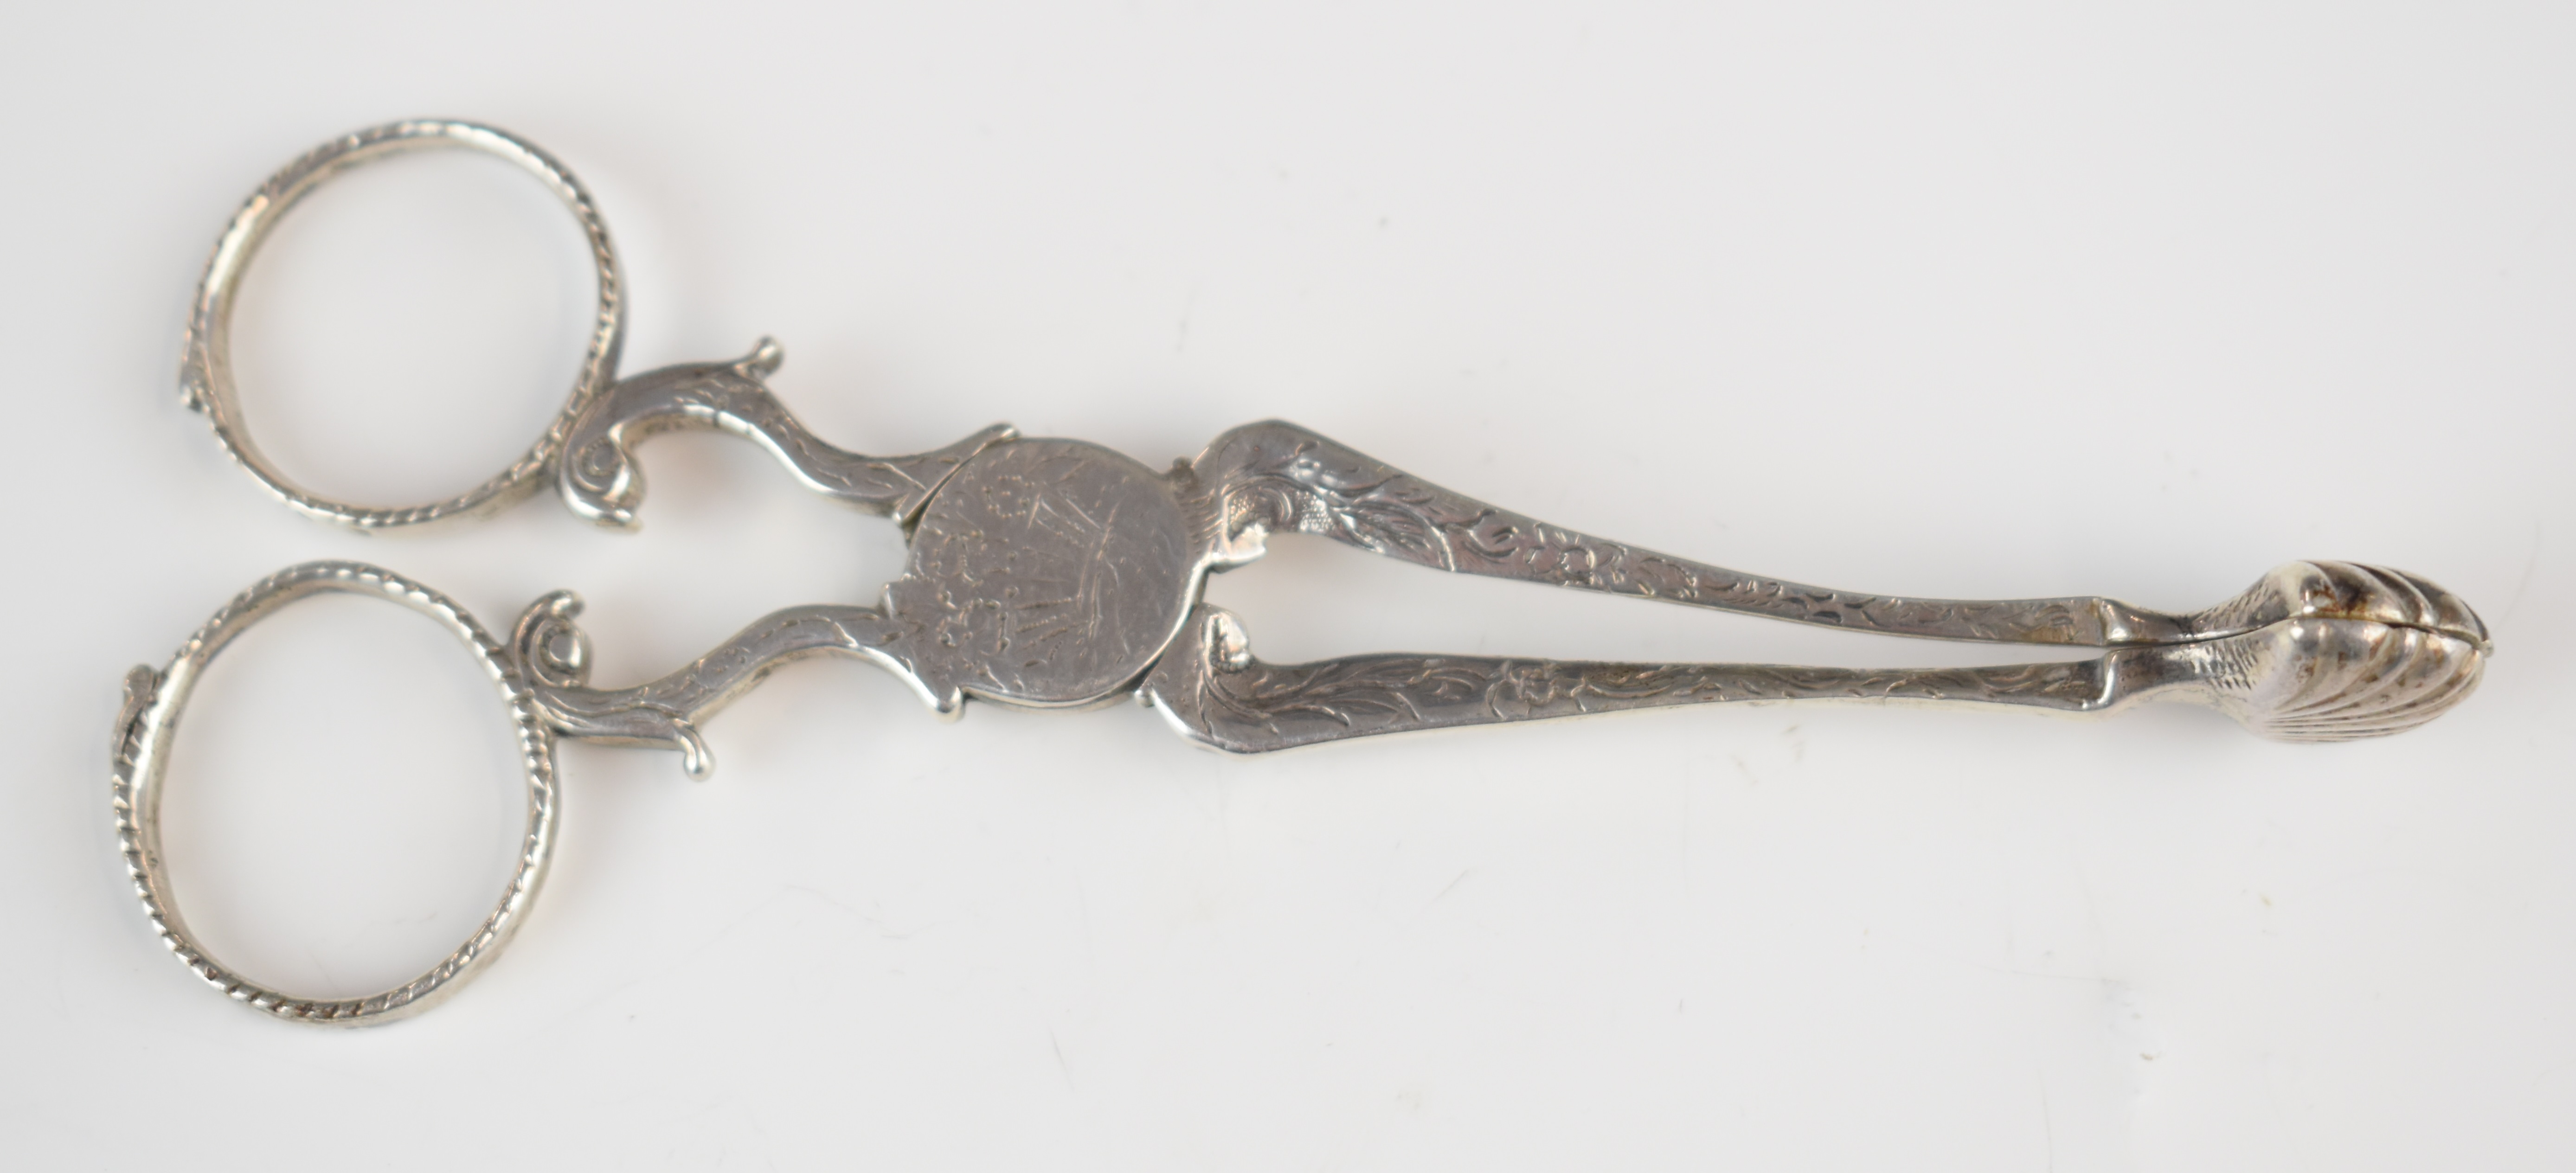 Georgian and later hallmarked silver cutlery including sugar nips and a pair of apostle or similar - Image 8 of 8